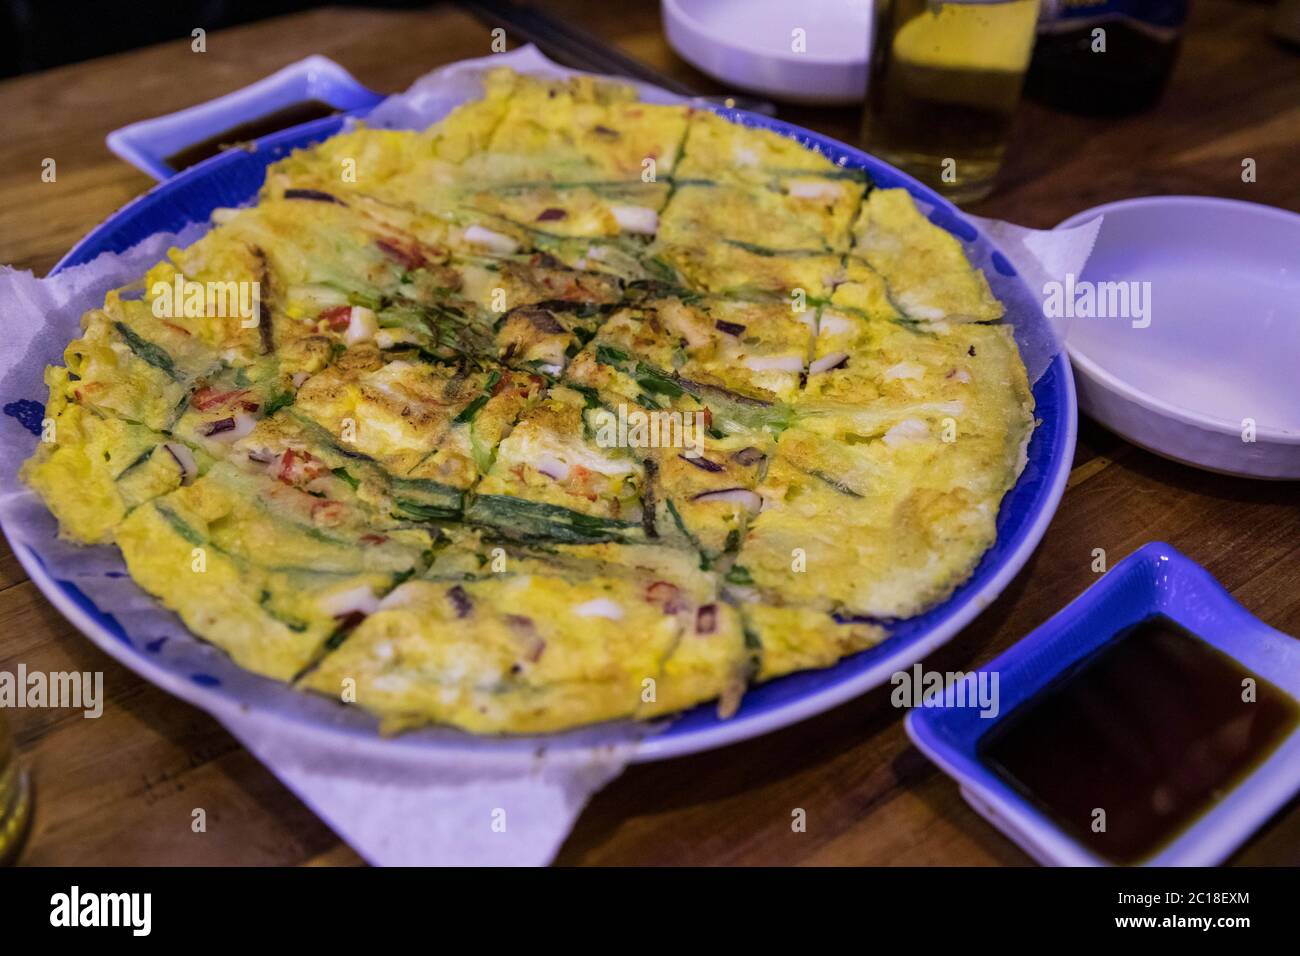 Korean savory squid, shrimp seafood and scallions pancake, Pajeon, on a big plate in a restaurant with dipping sauce. Stock Photo